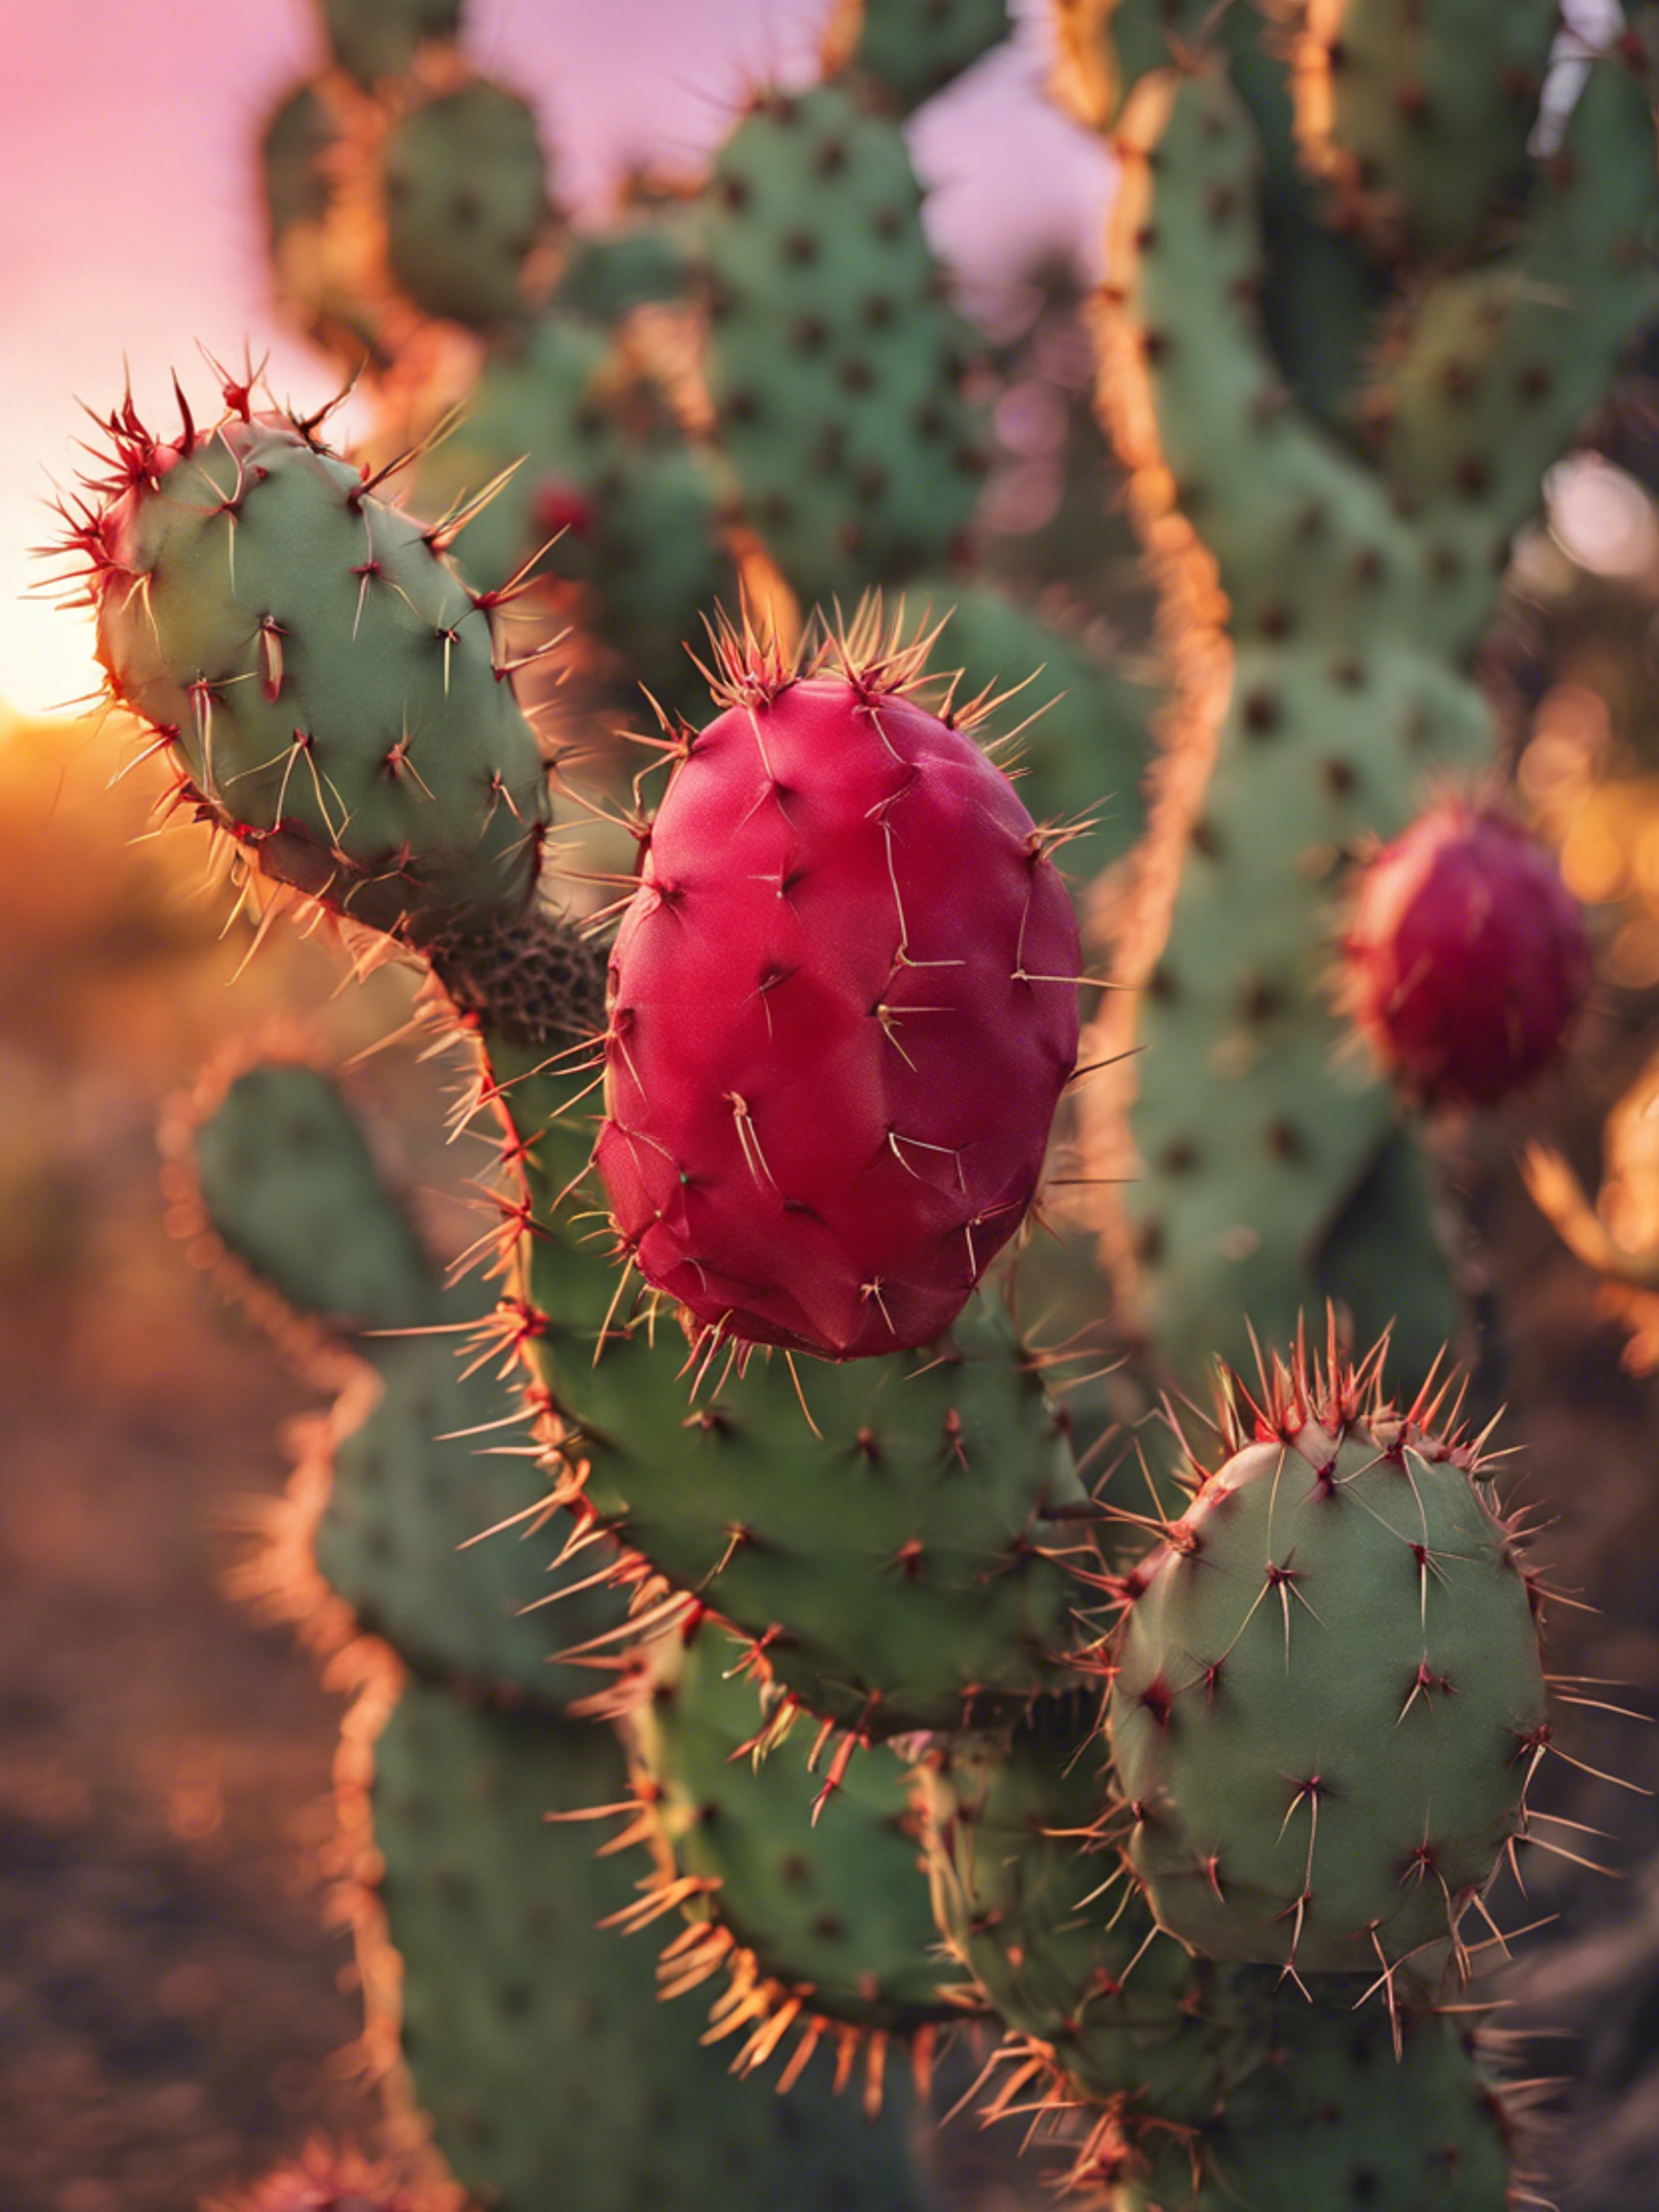 A prickly pear cactus with ripe, red fruits against a sunset background. Ταπετσαρία[5965817ee192450fa25b]